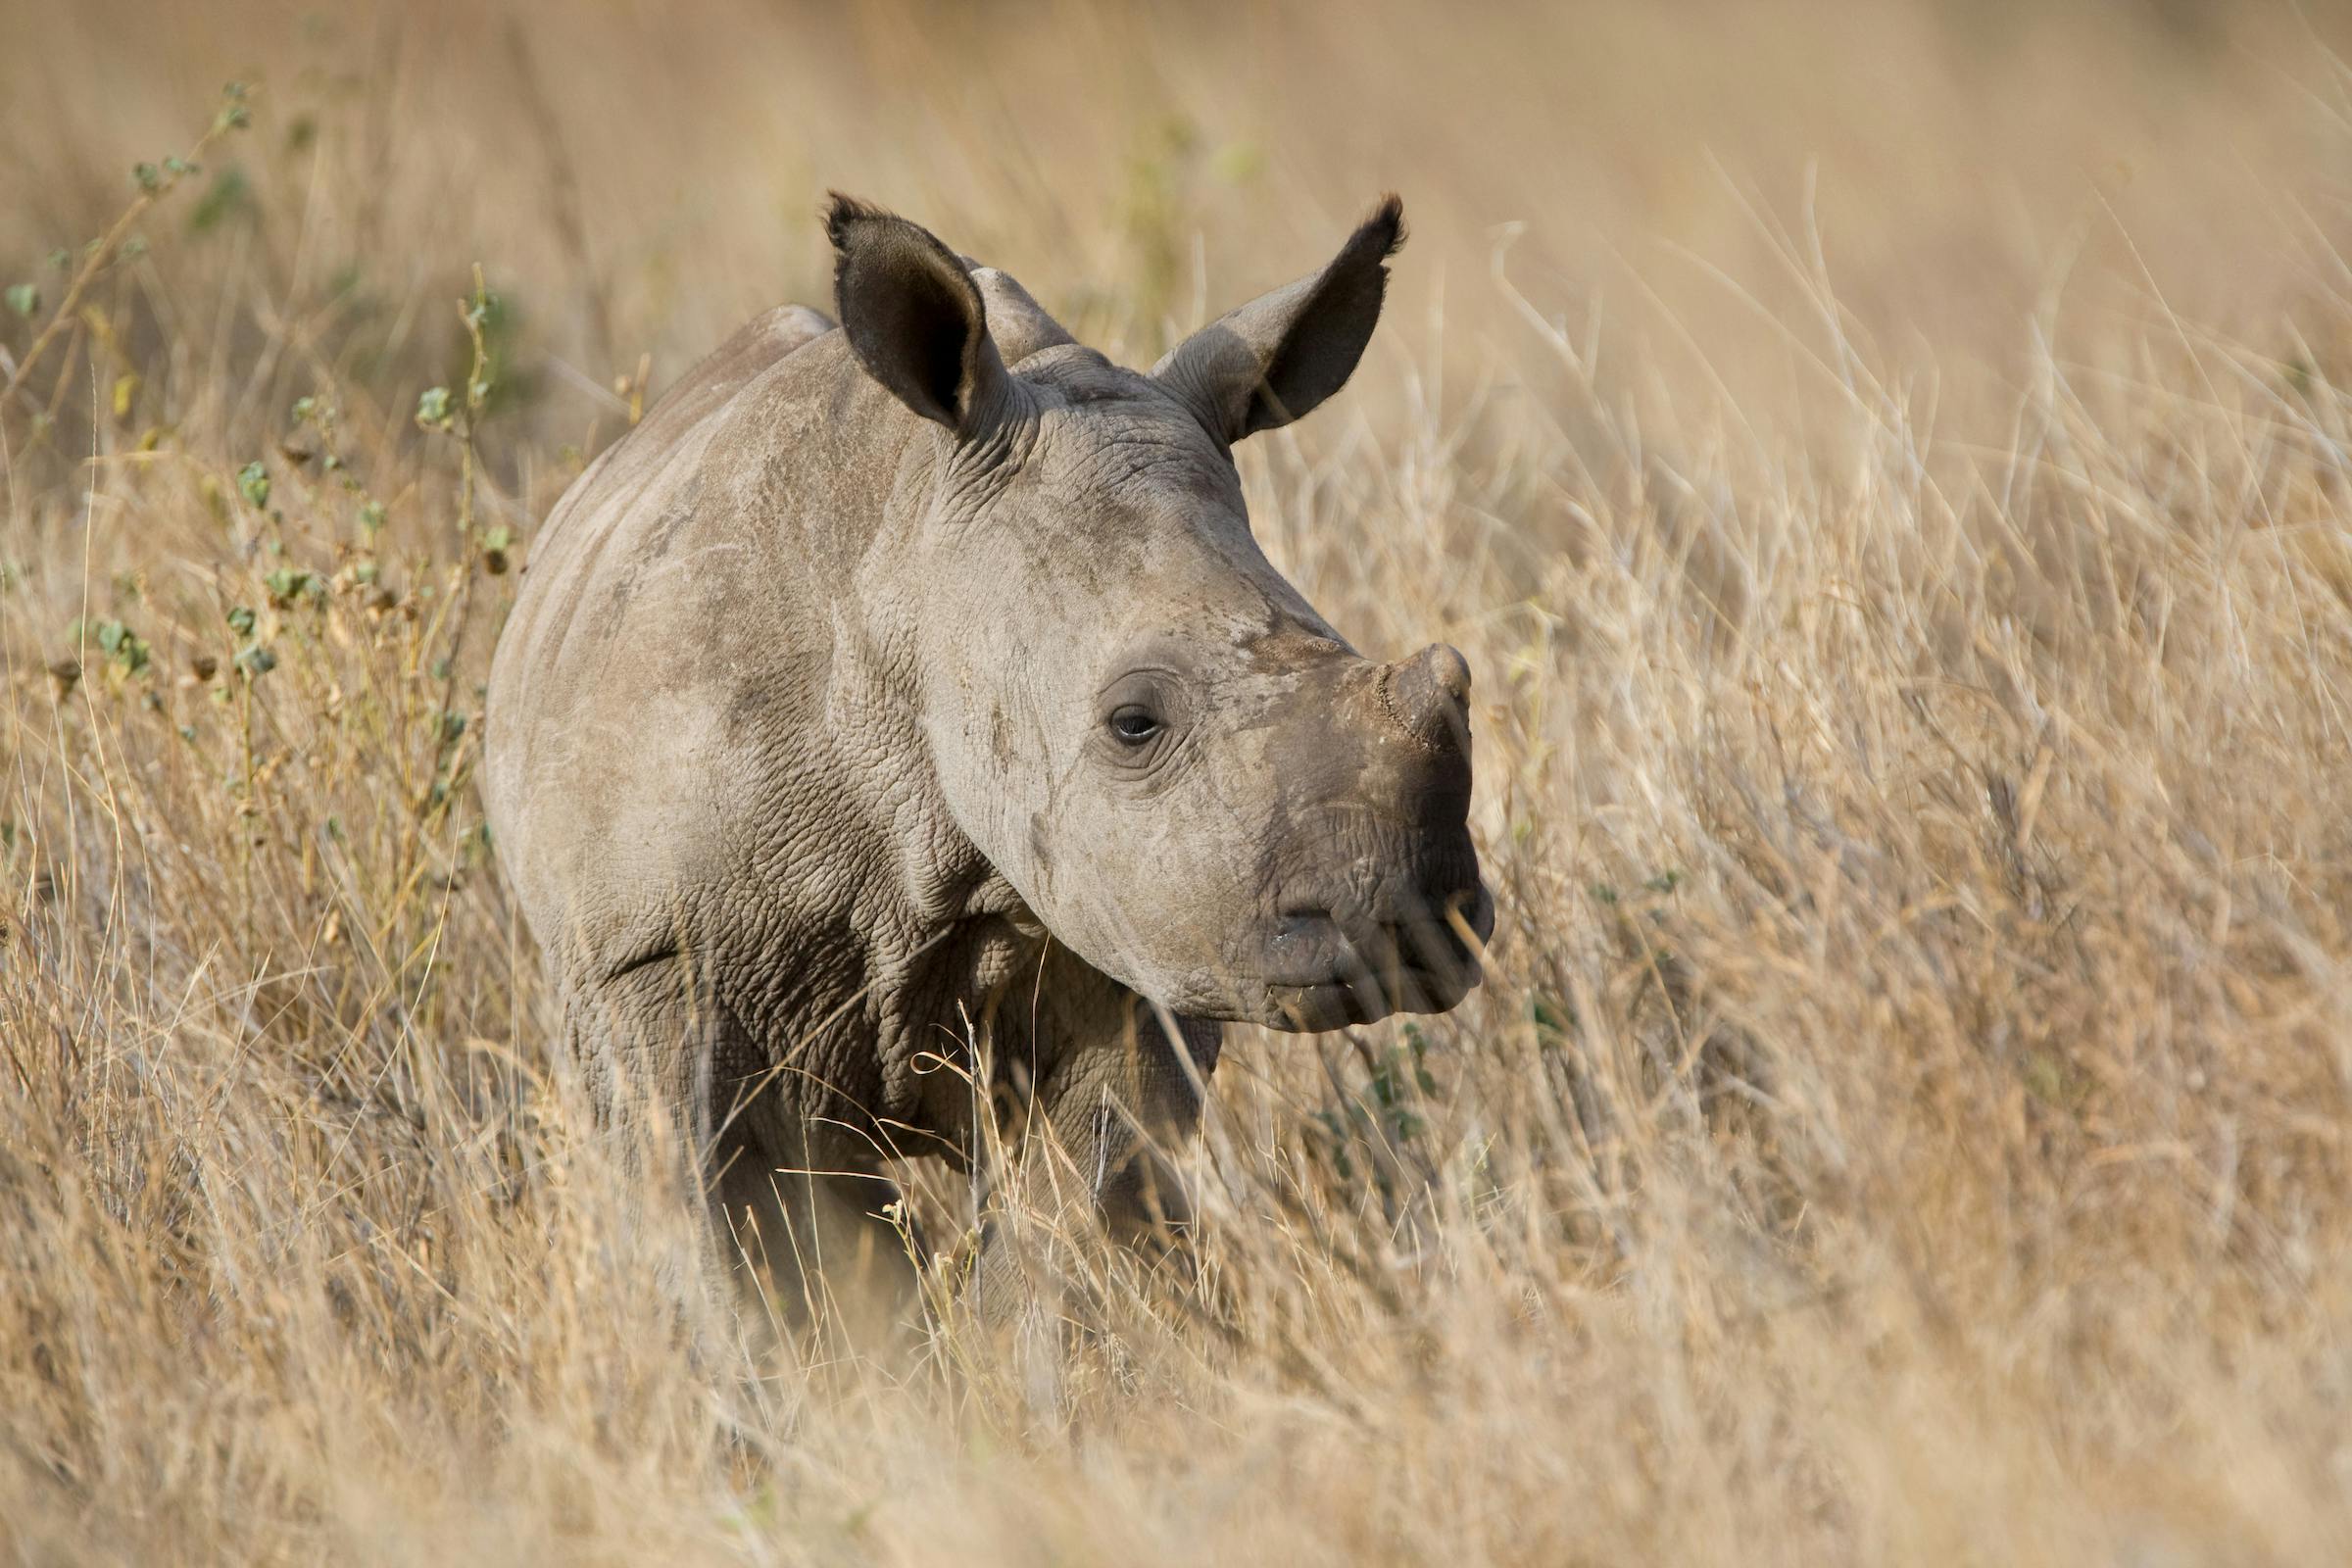 Rescuing a Rhino Calf in Time for World Rhino Day